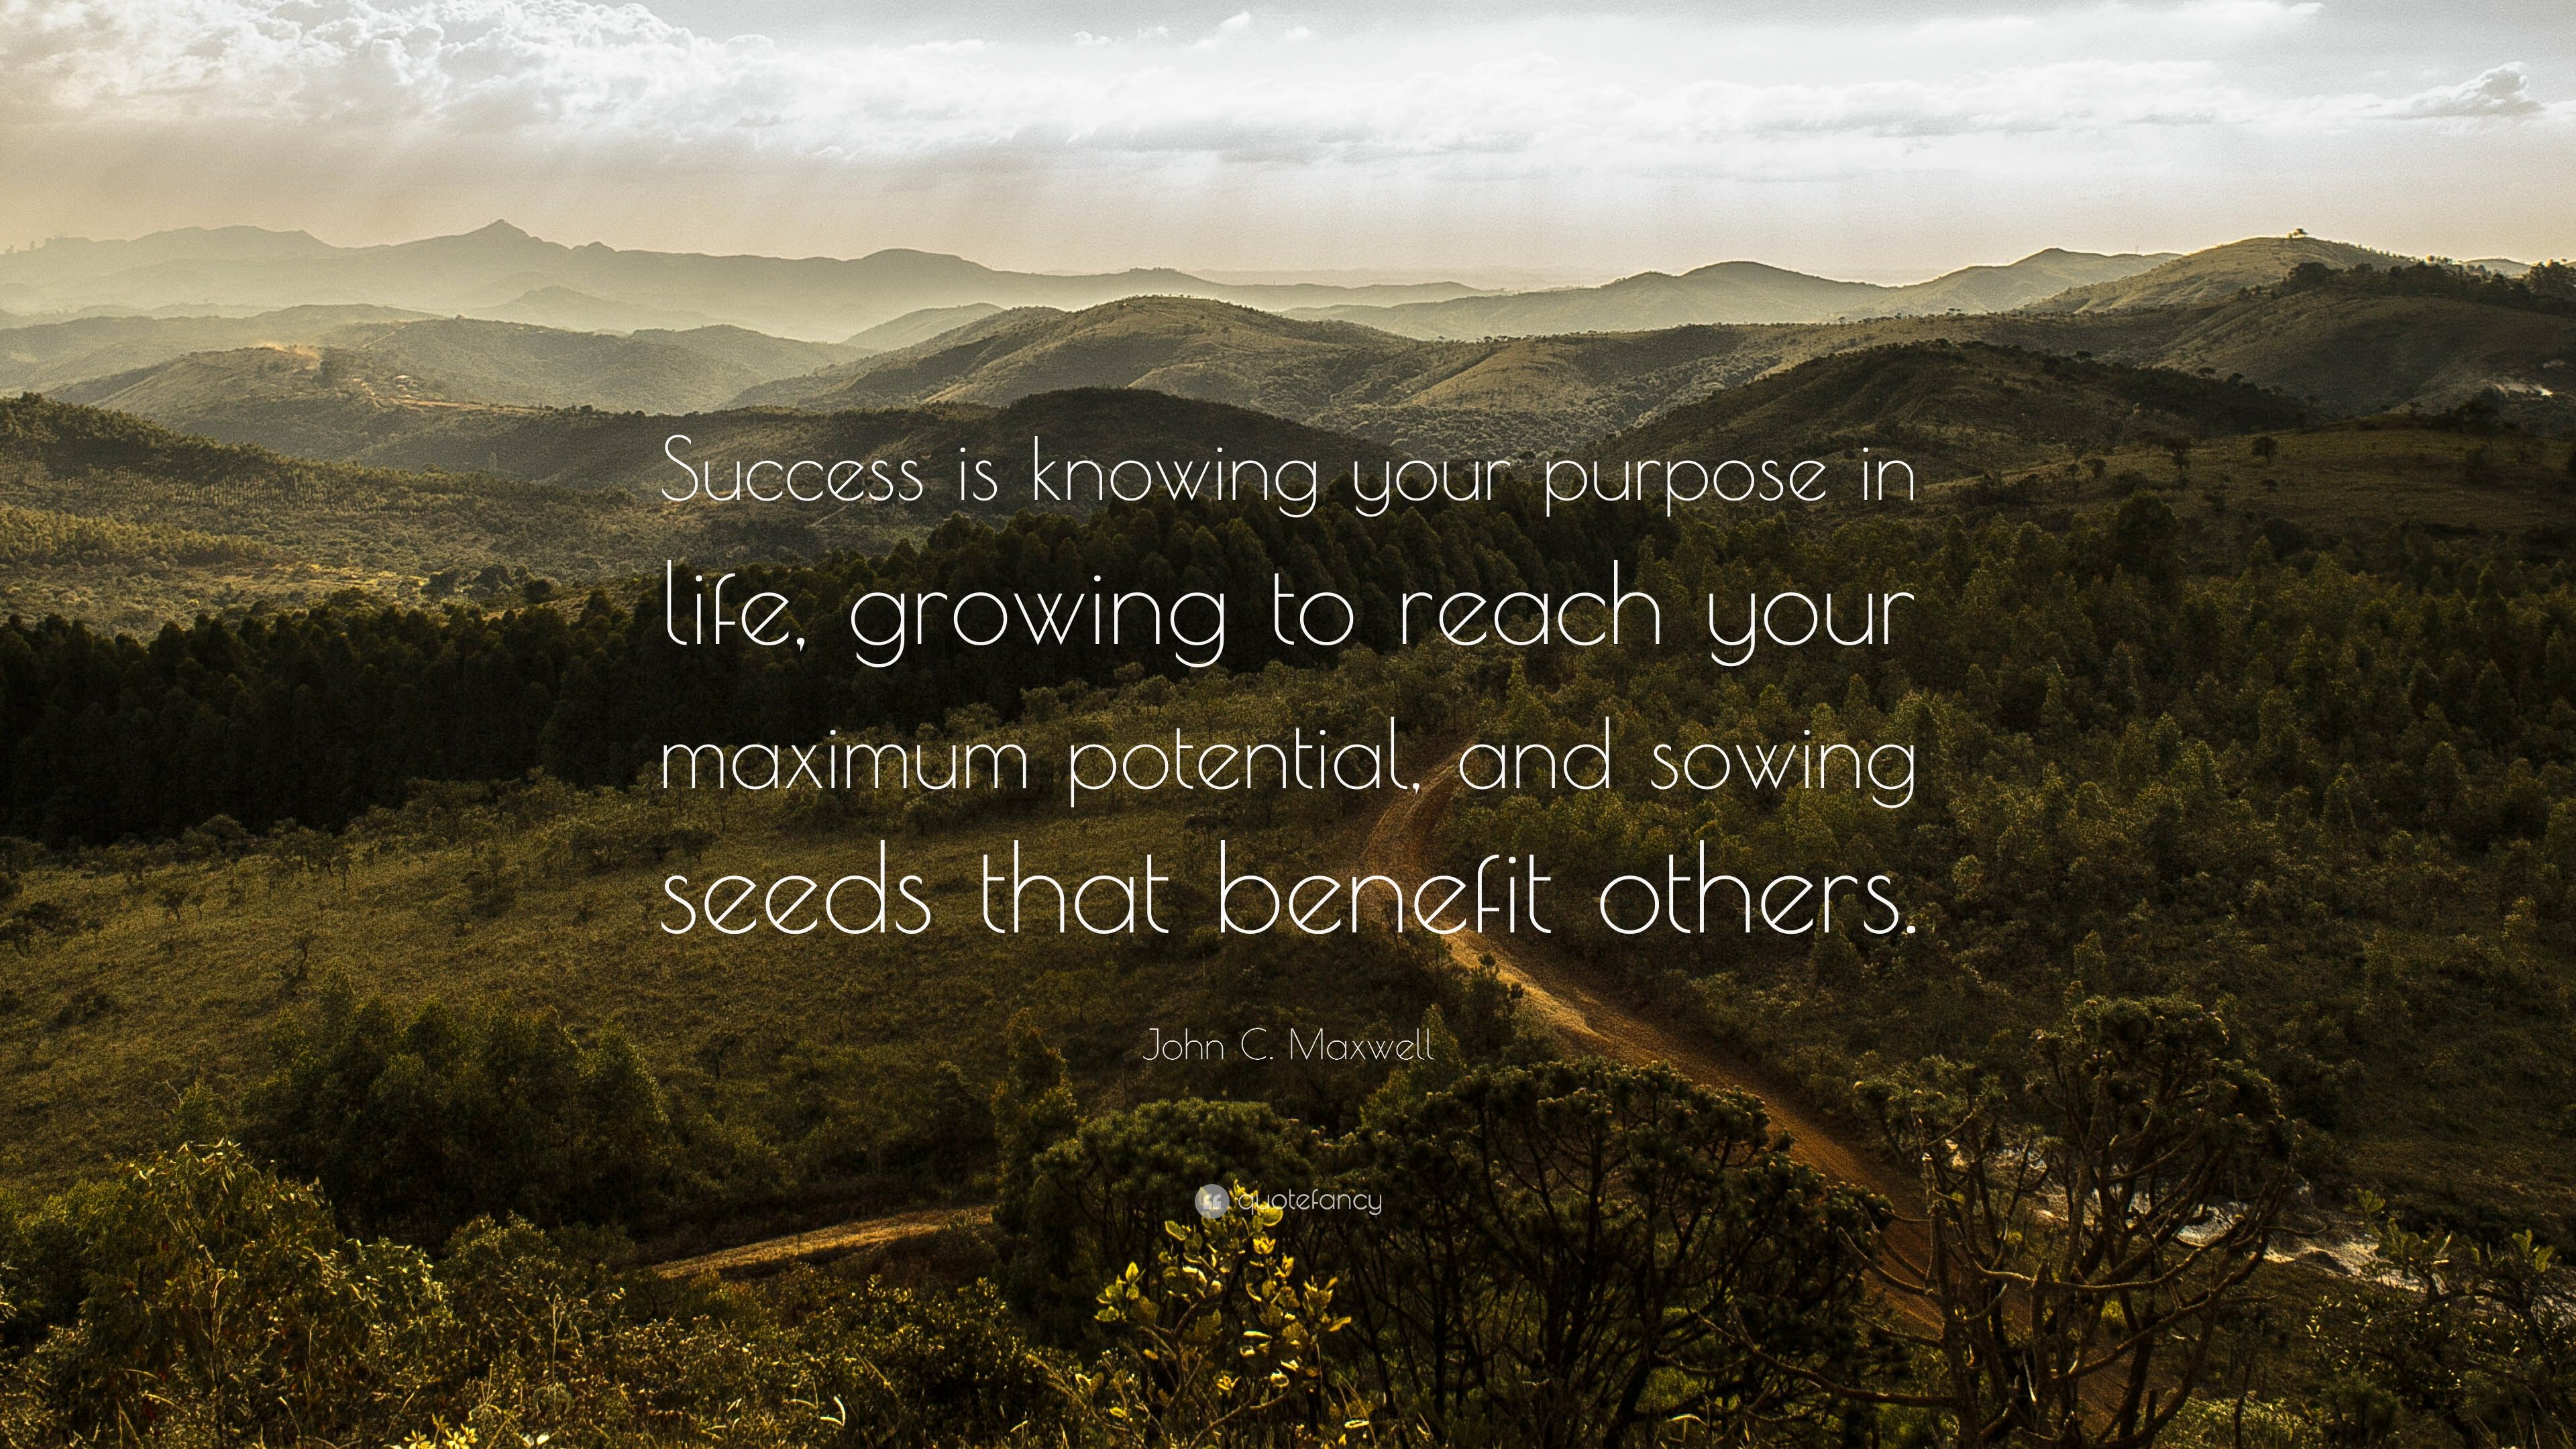 John C. Maxwell Quote: “Success is knowing your purpose in life, growing to reach your maximum